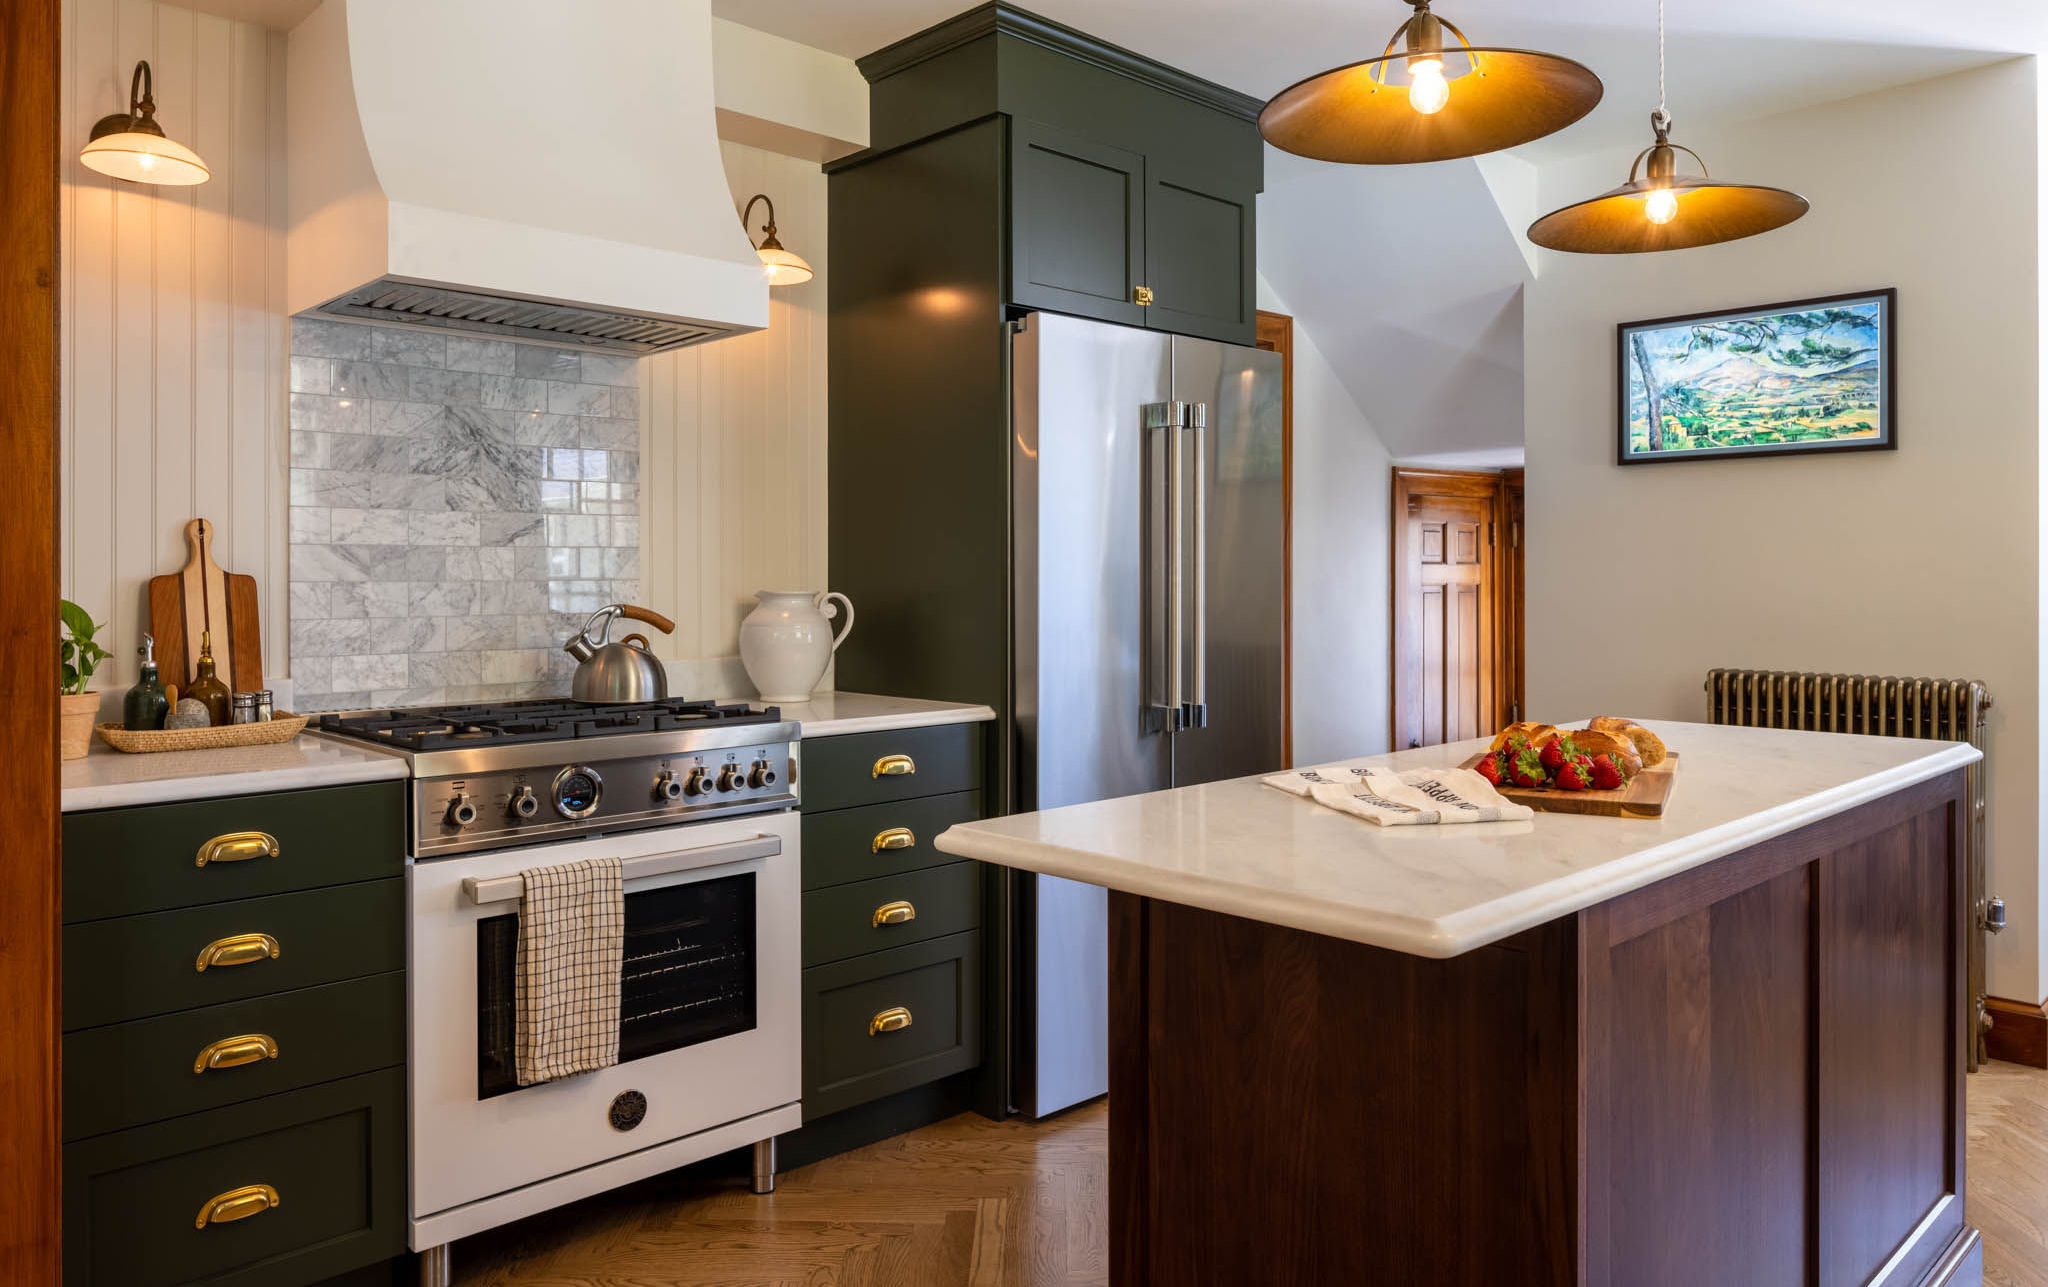 Melrose Kitchen Design with olive green cabinets and a walnut island